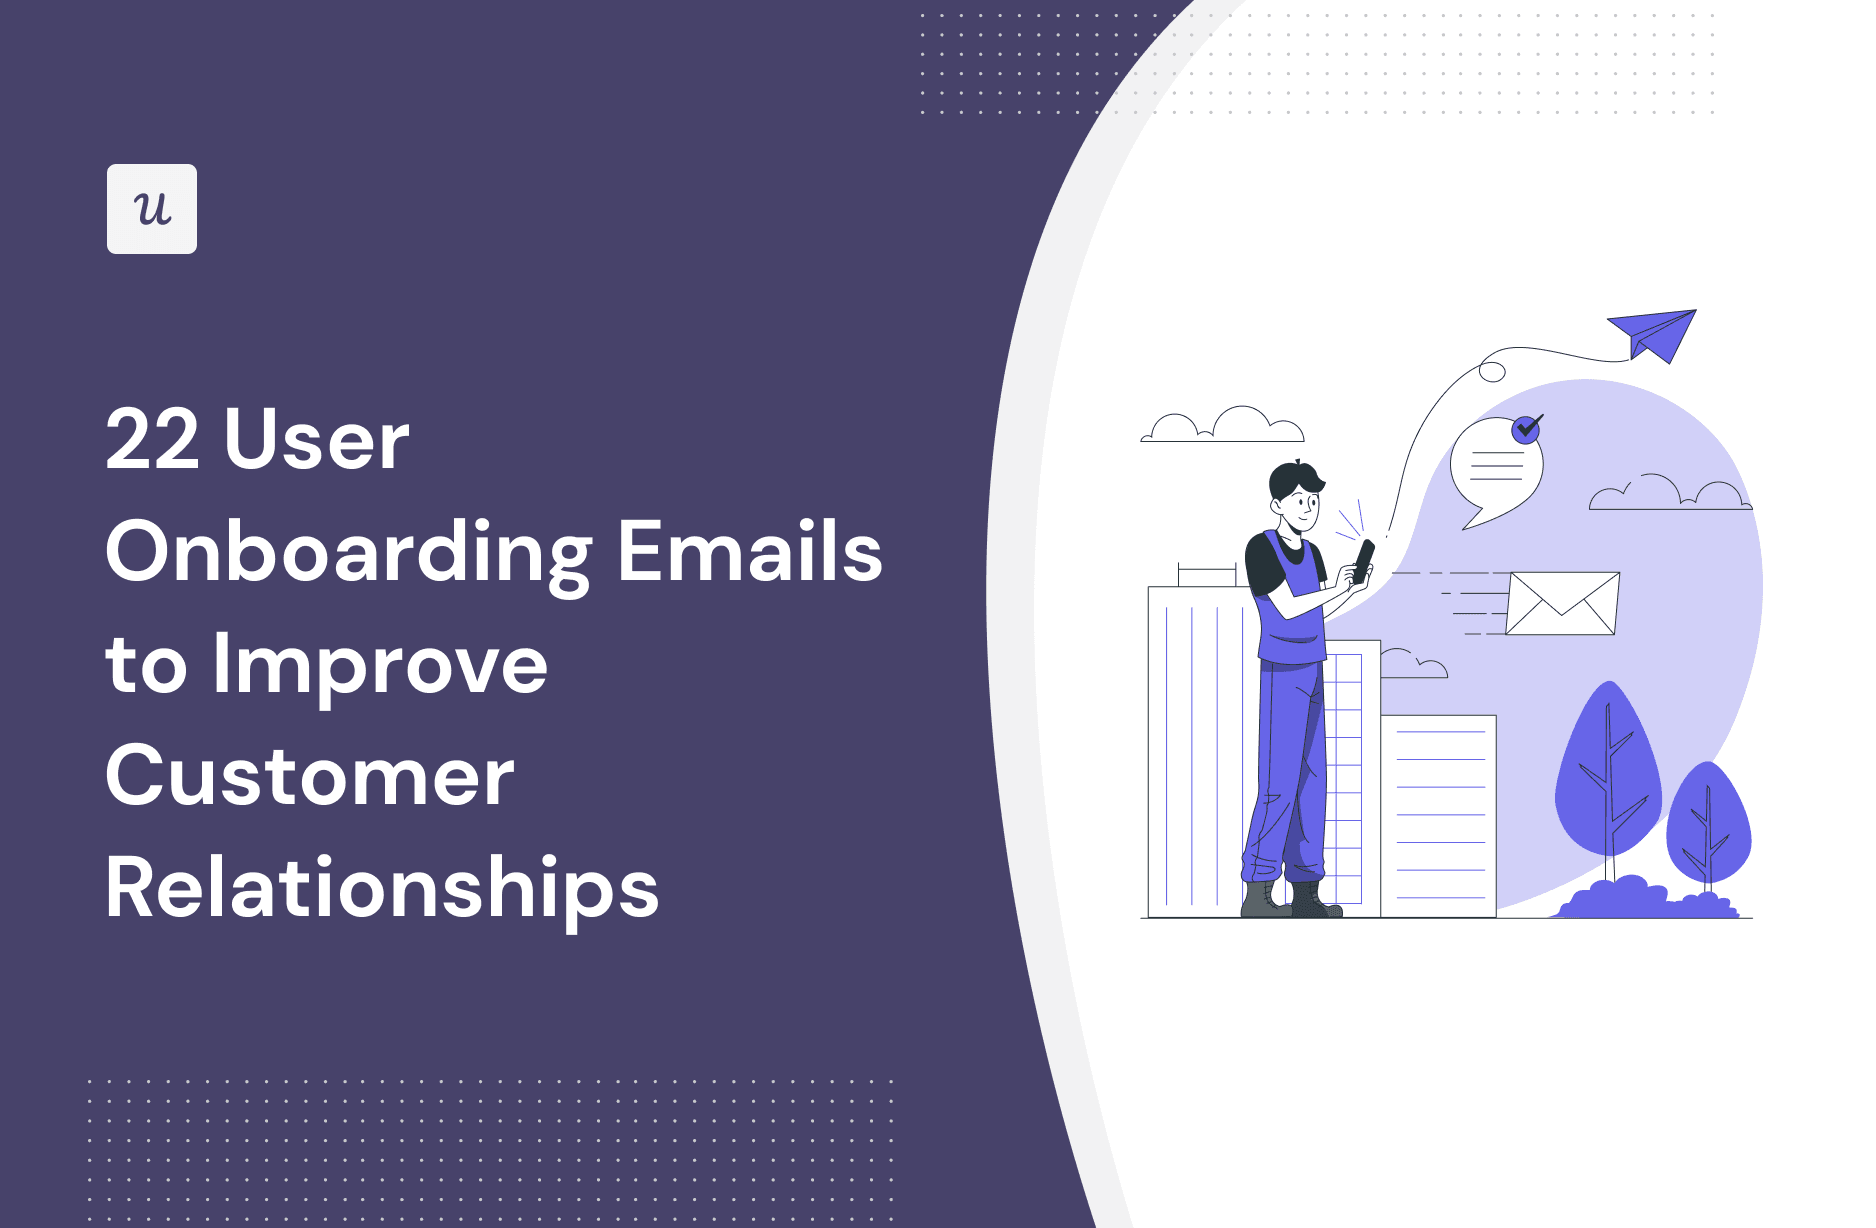 22 User Onboarding Emails to Improve Customer Relationships cover